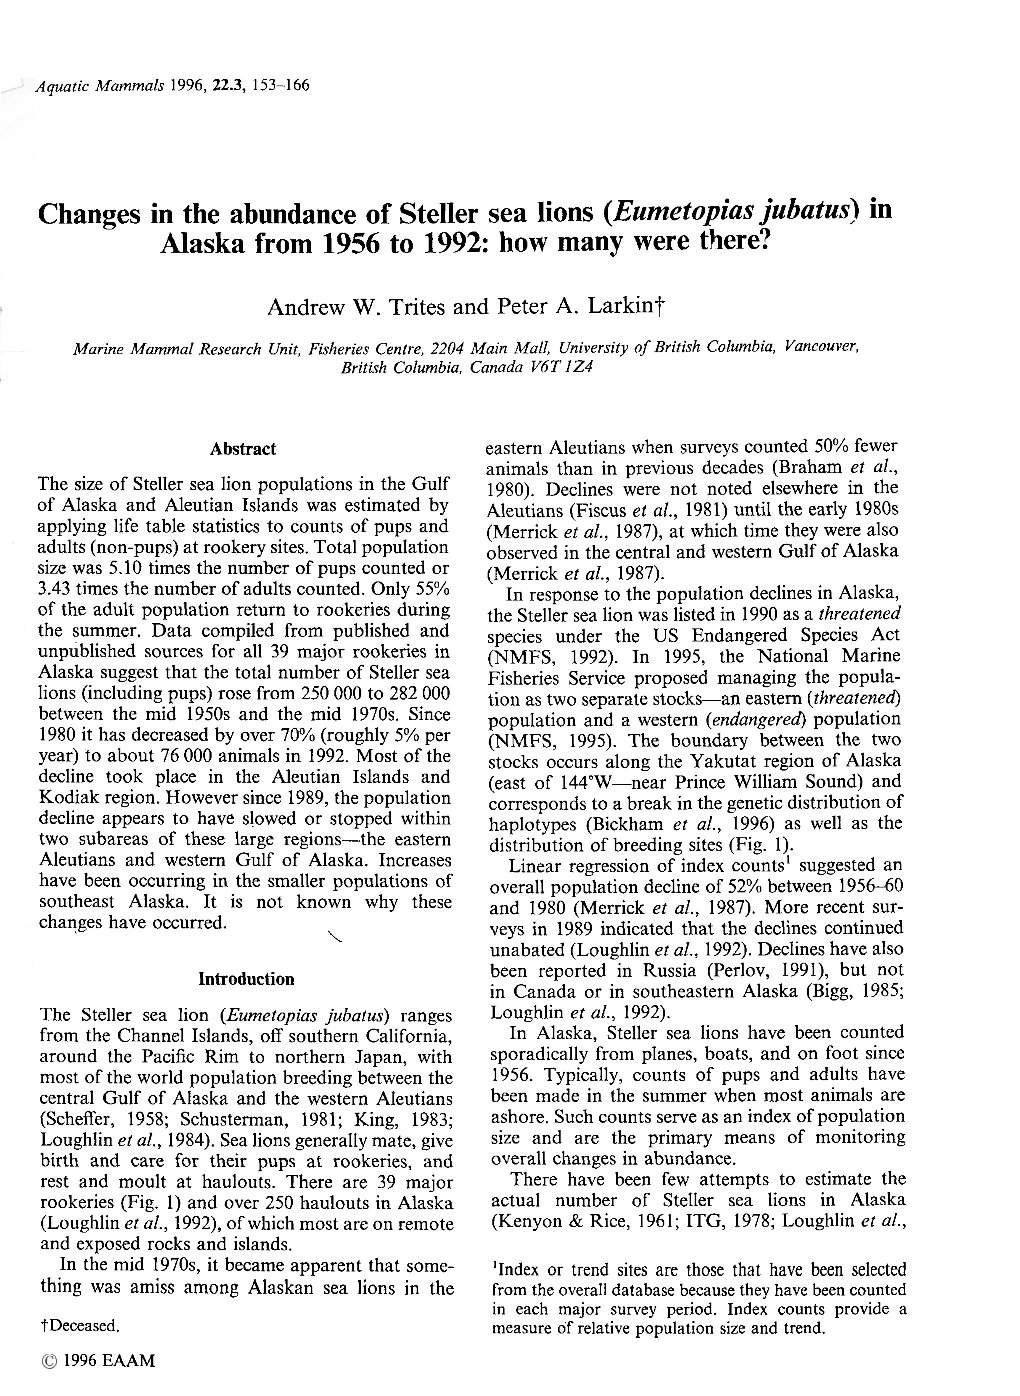 Changes in the Abundance of Steller Sea Lions (Eumetopias Jubatus) in Alaska from 1956 to 1992: How Many Were There?